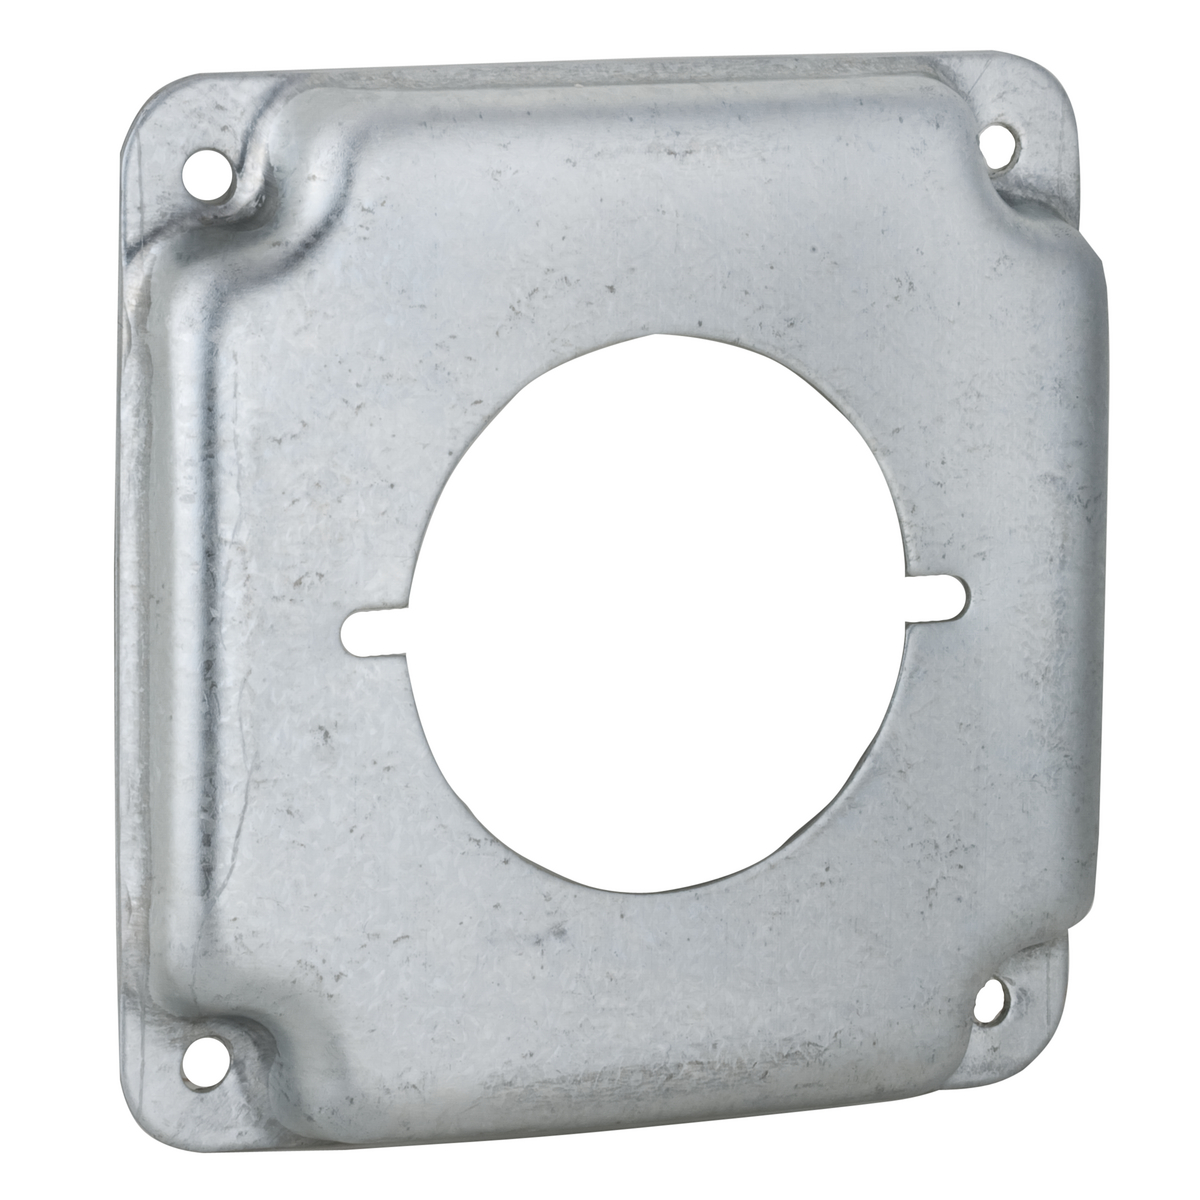 RACO 810C 4" SQUARE WORK COVER